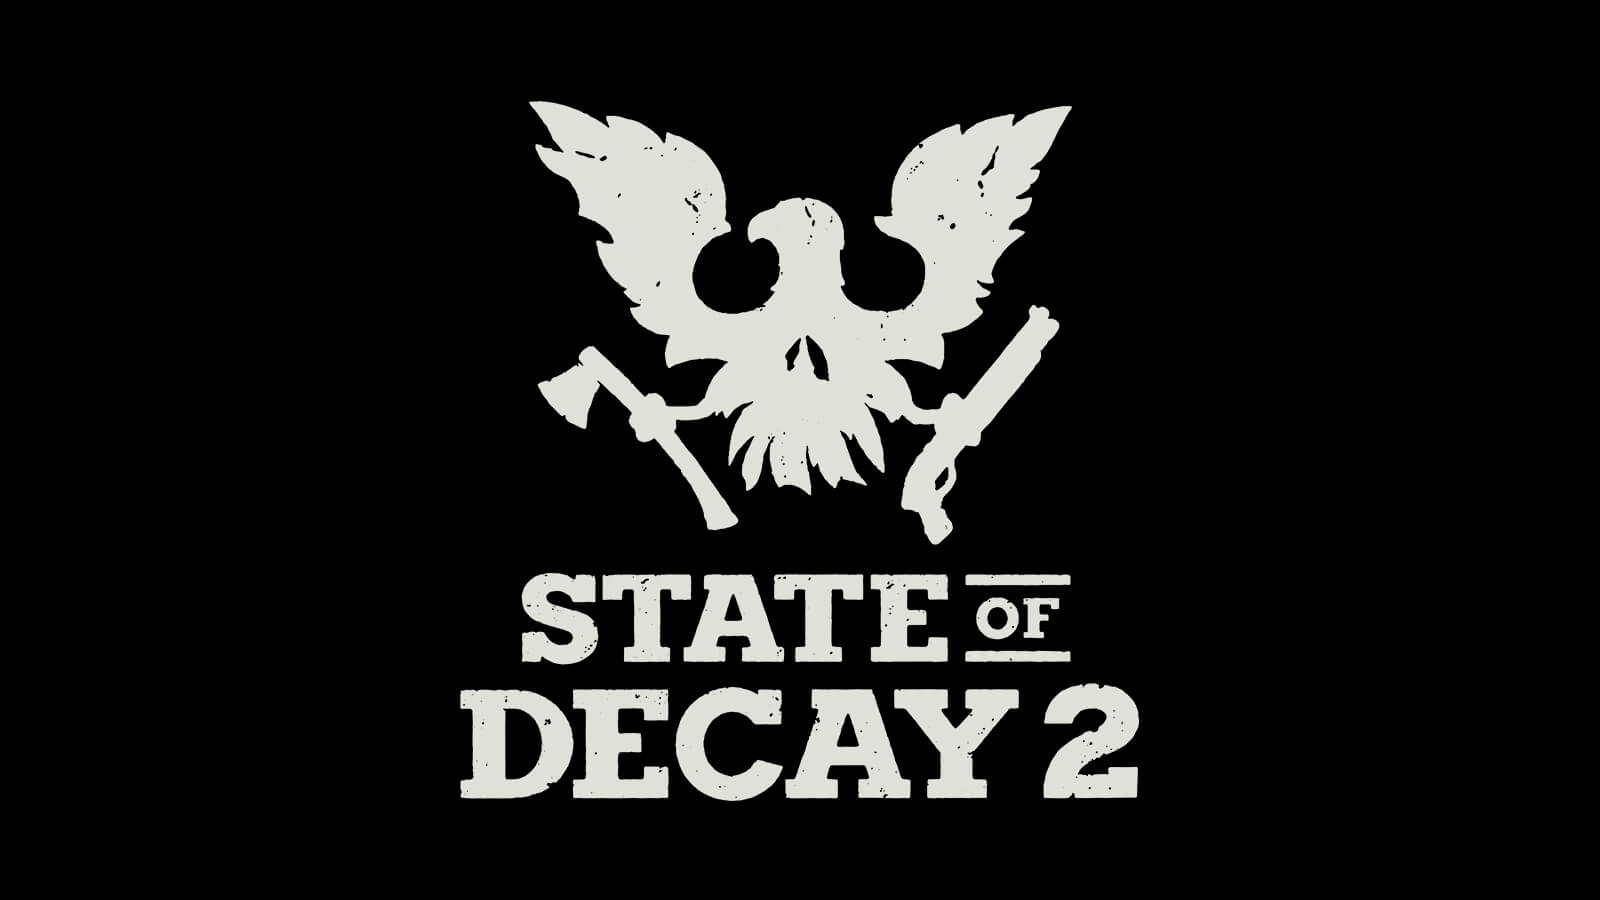 State of Decay 3 - Game Trailer 